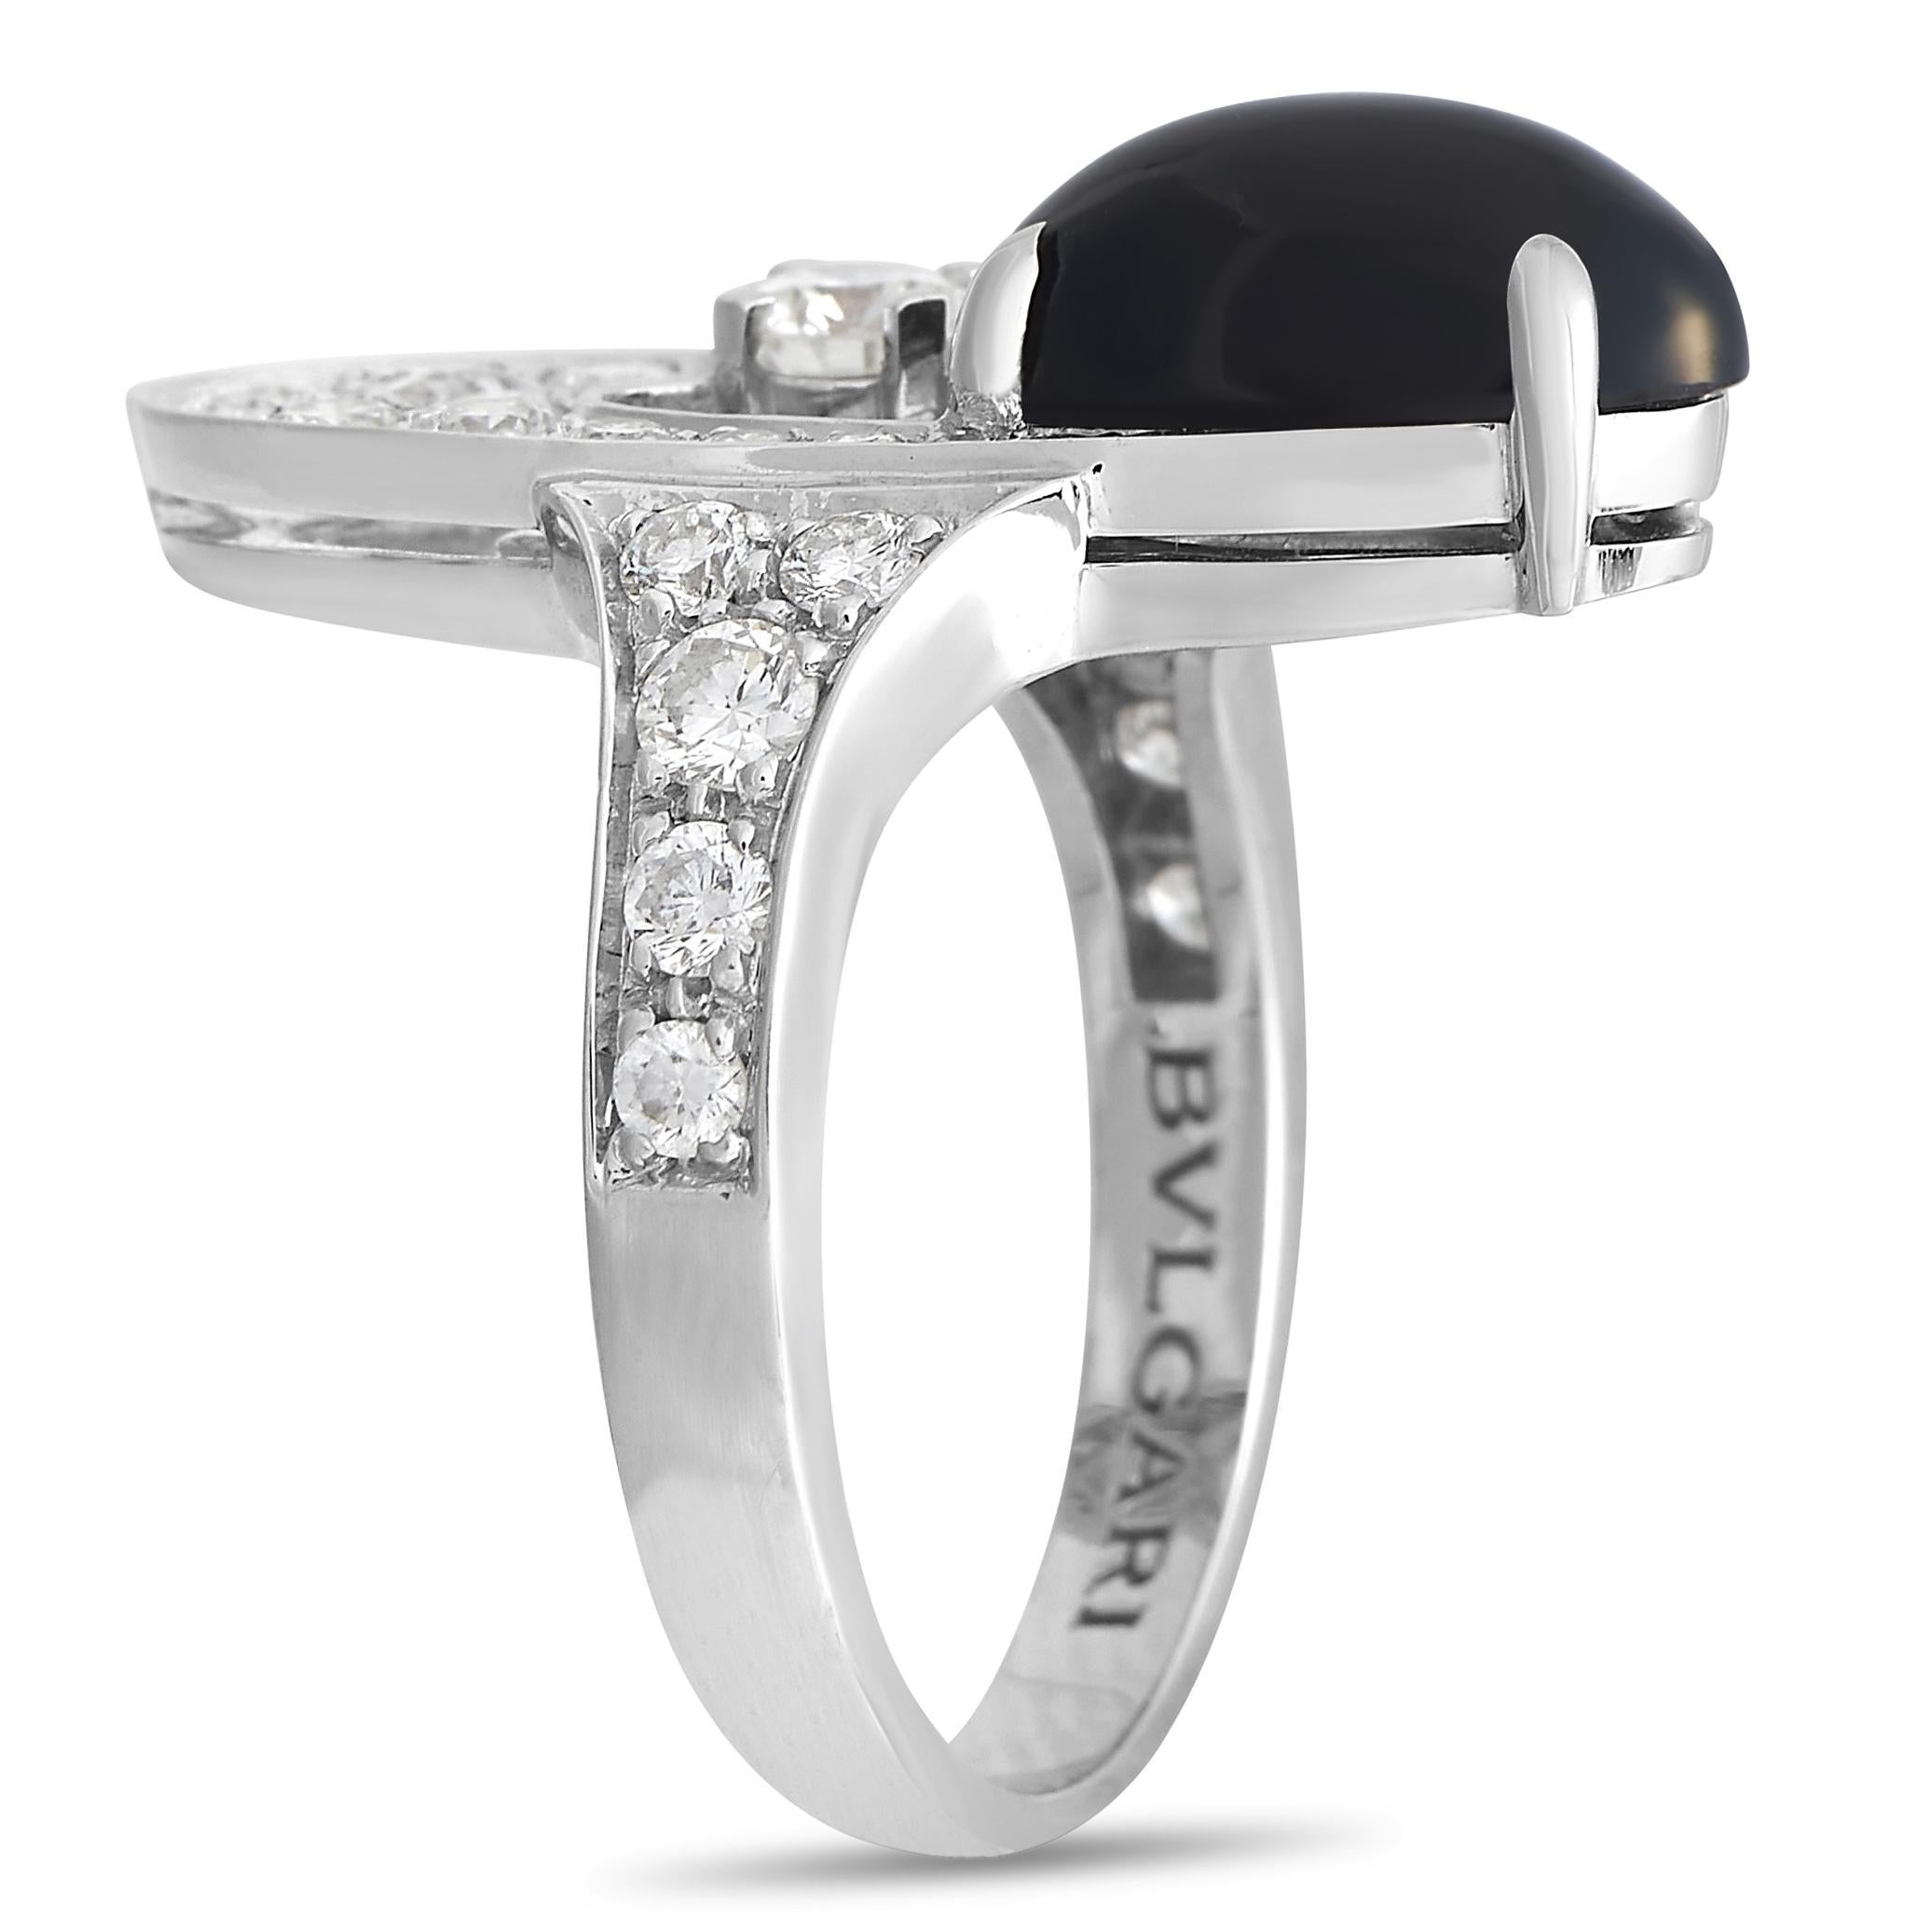 This bold Bvlgari Elisa 18K White Gold Diamond Onyx Ring is sure to attract attention. The ring is made with 18K White Gold and set with a number of round-cut diamonds of assorted sizes over the band and the face of the ring. The lower half of the